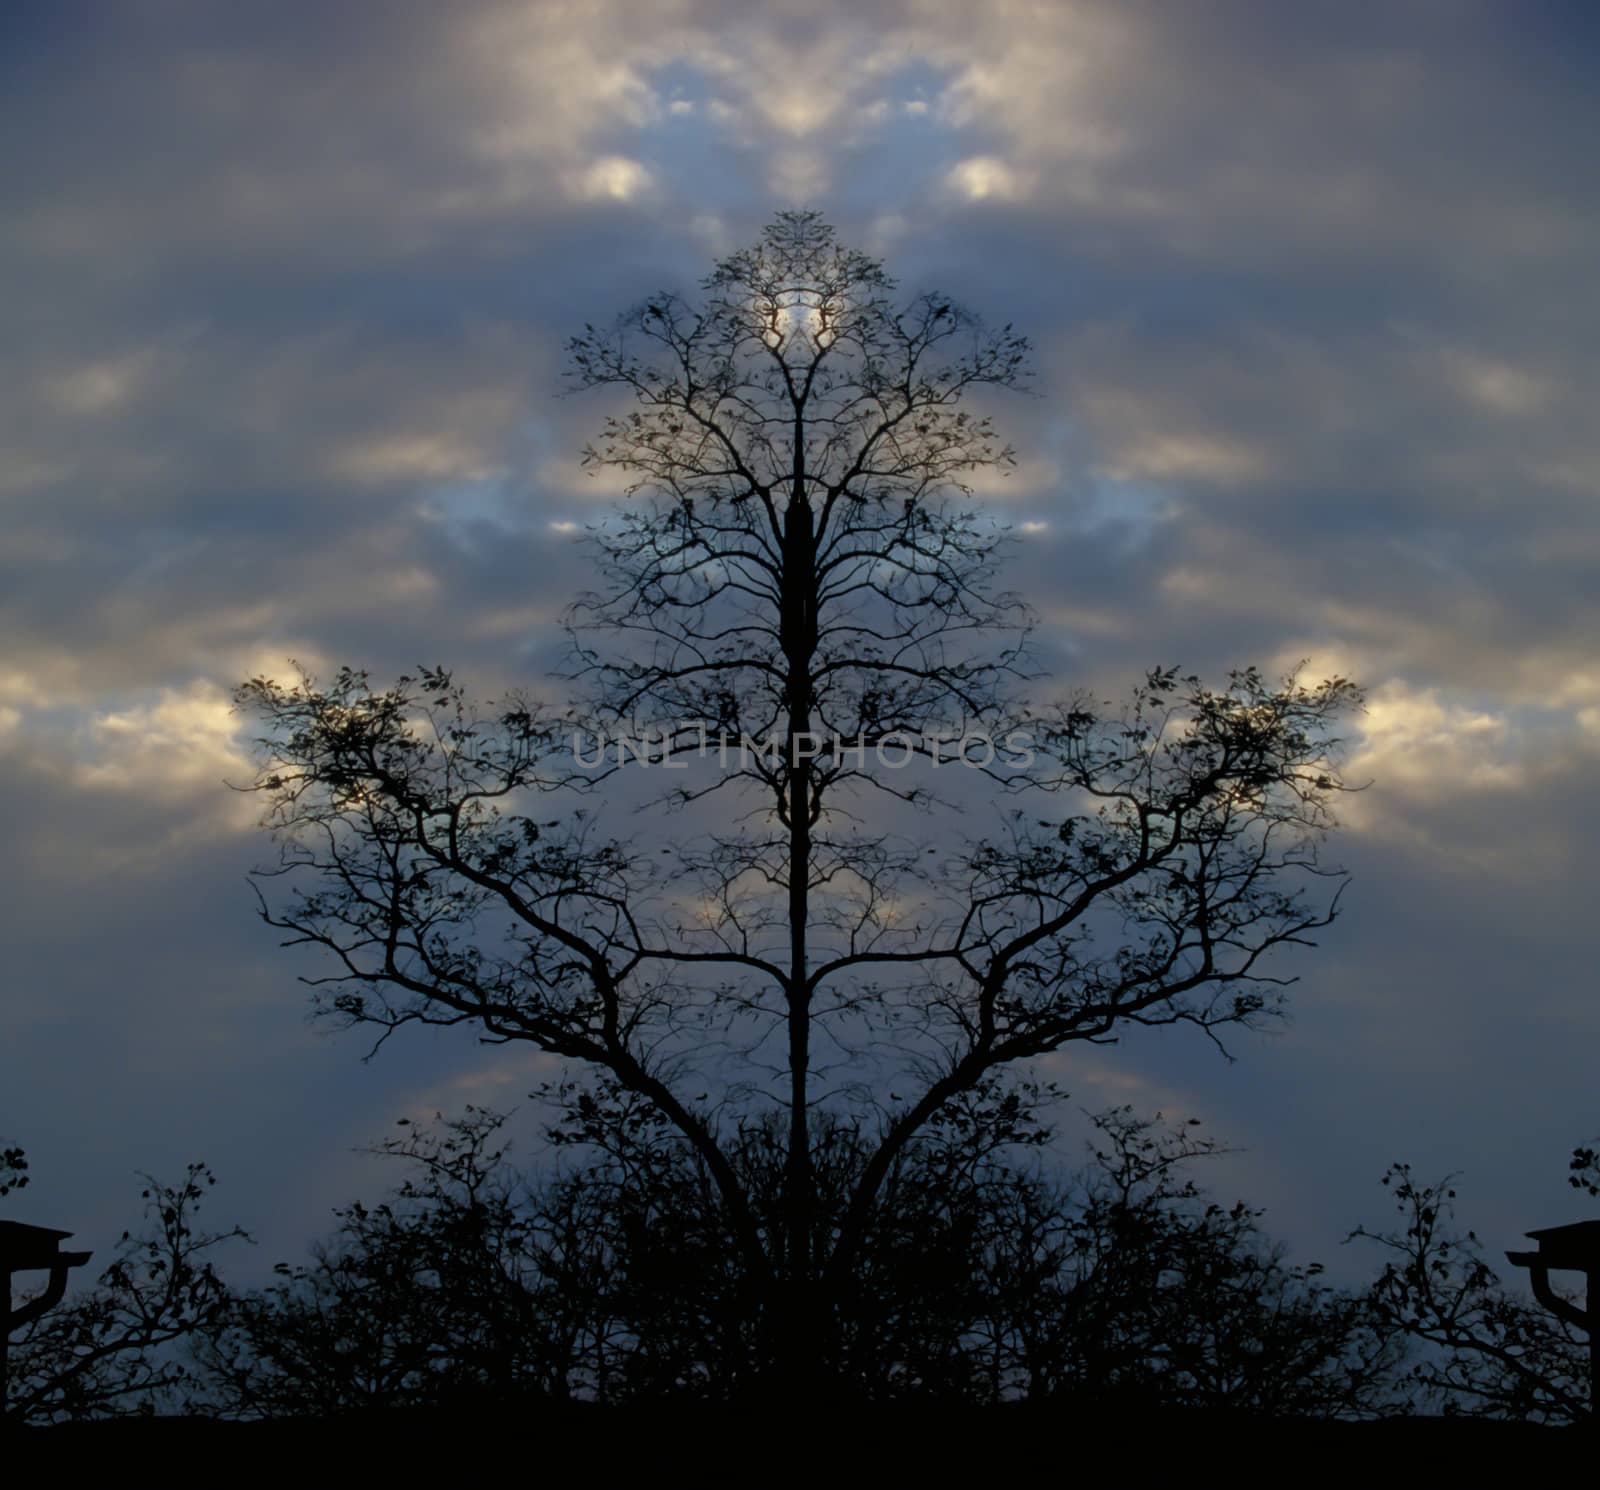 Surreal trees by applesstock